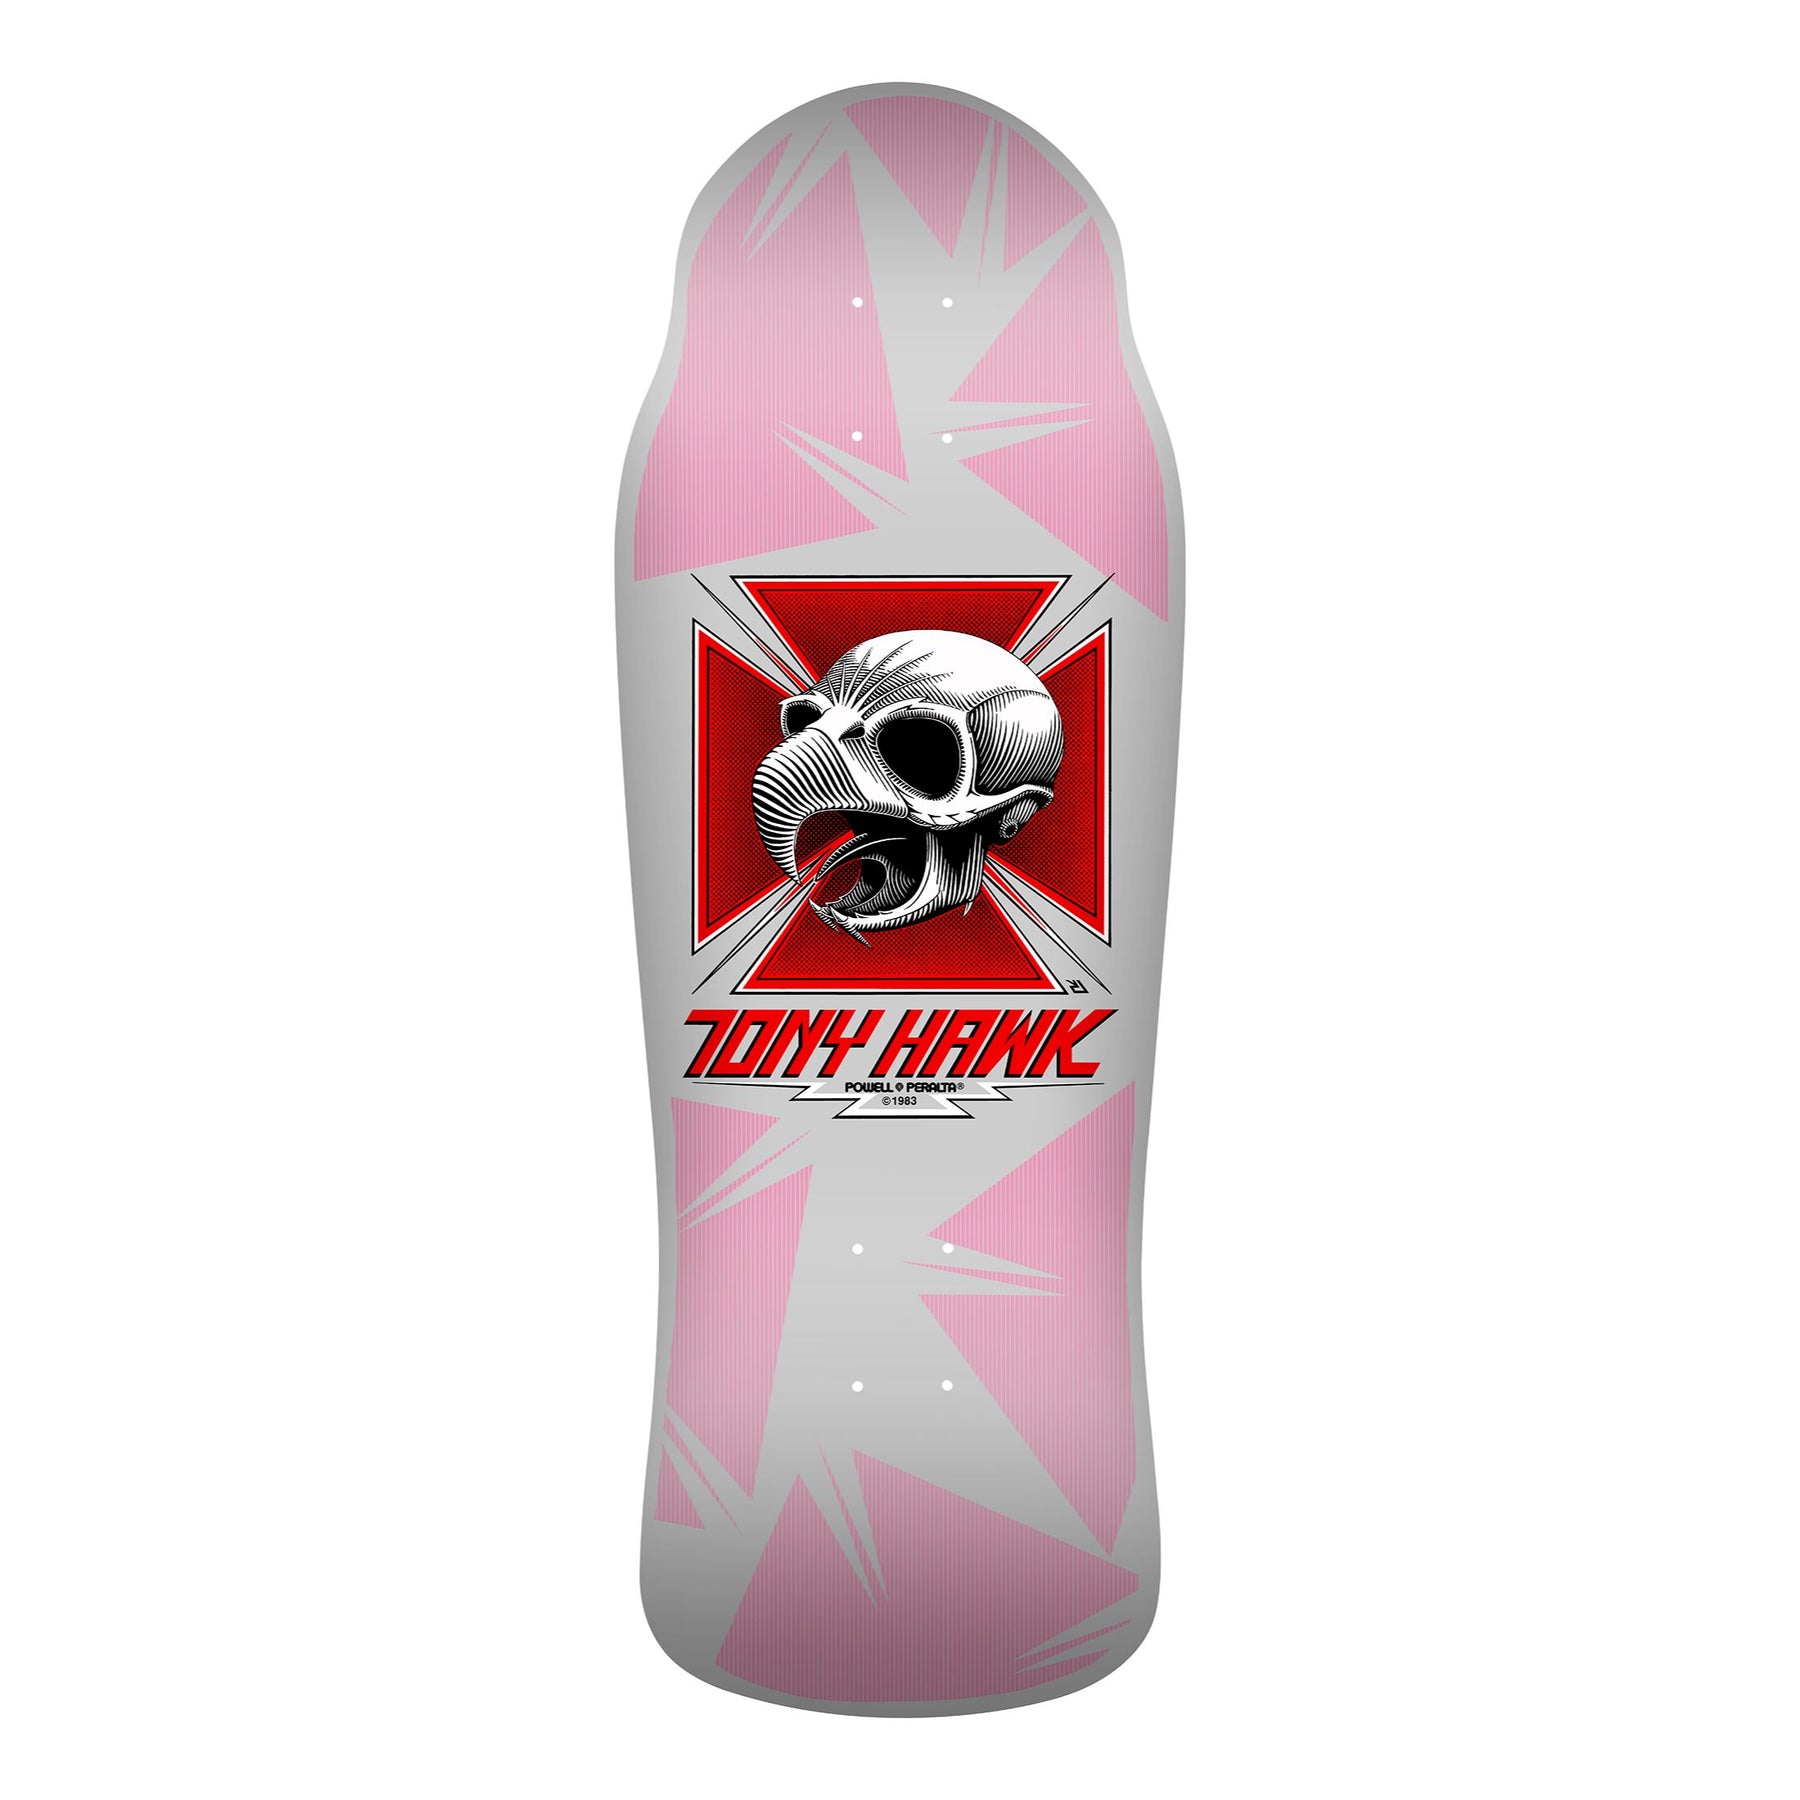 Powell-Peralta Re-Issue Limited Edition Collector Skateboard Decks, Series 12, Tony Hawk